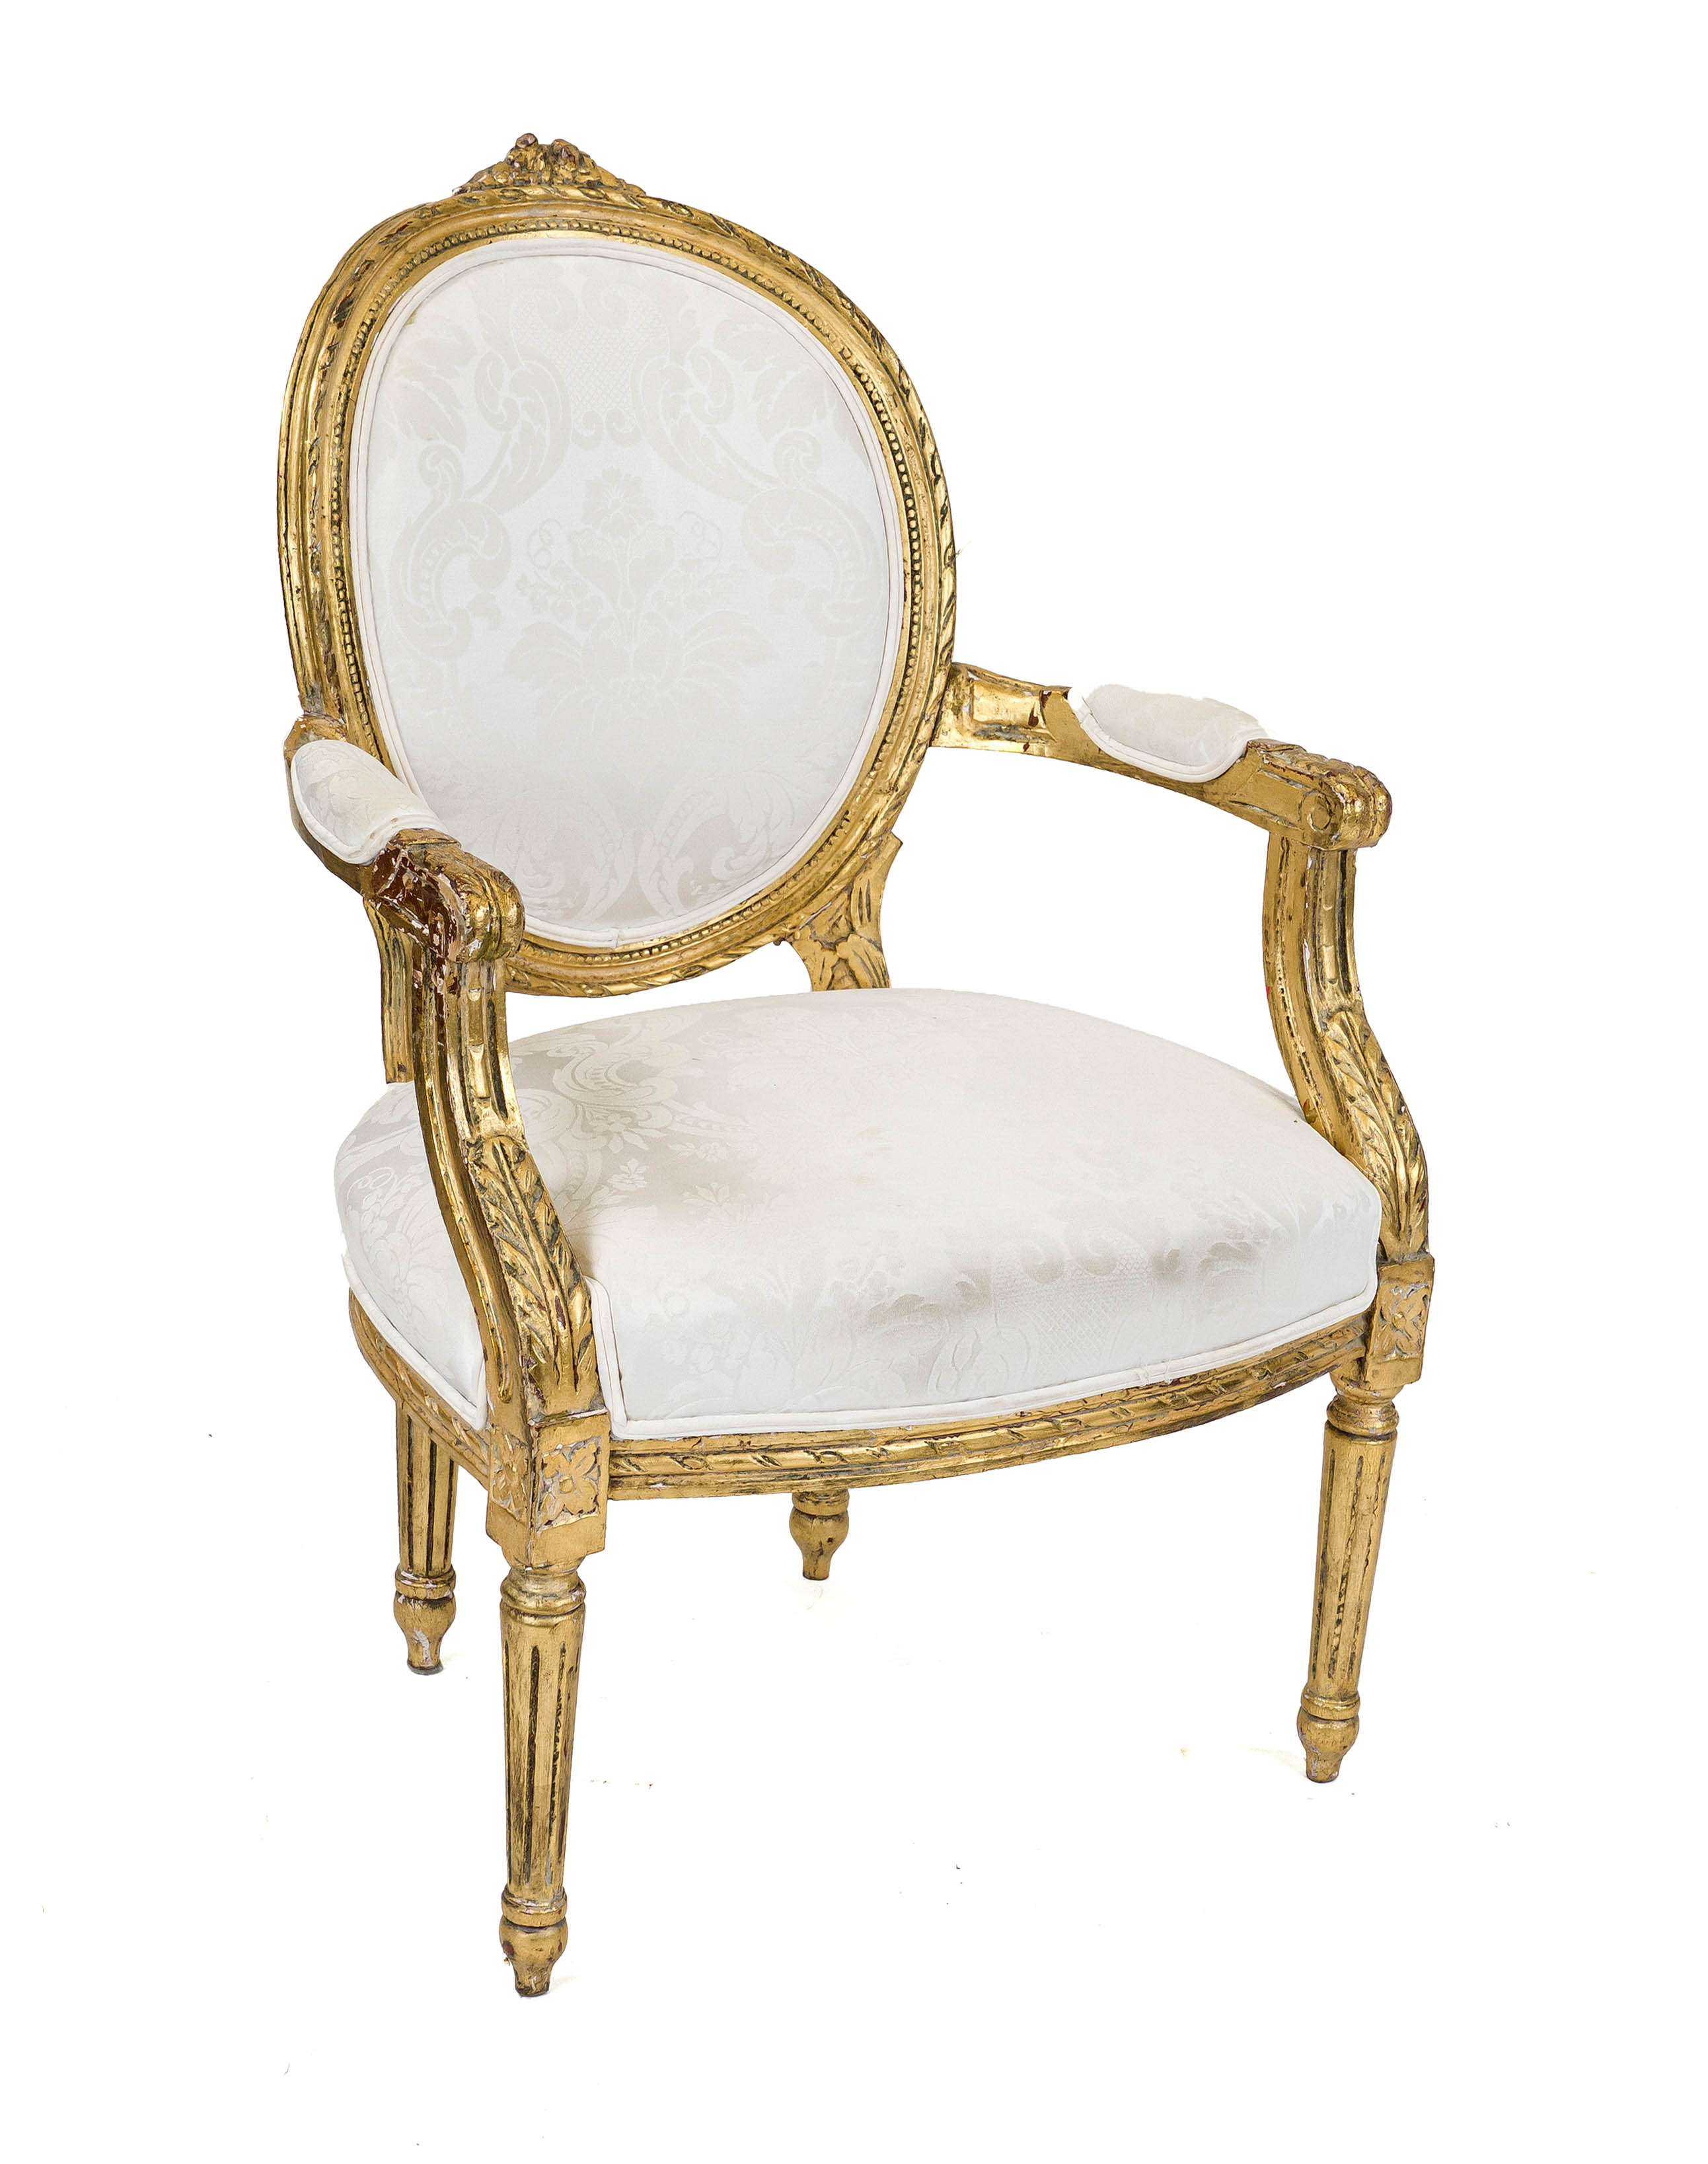 Louis-Seize style armchair, 19th century, carved and gilded beech wood, fluted, tapering legs,